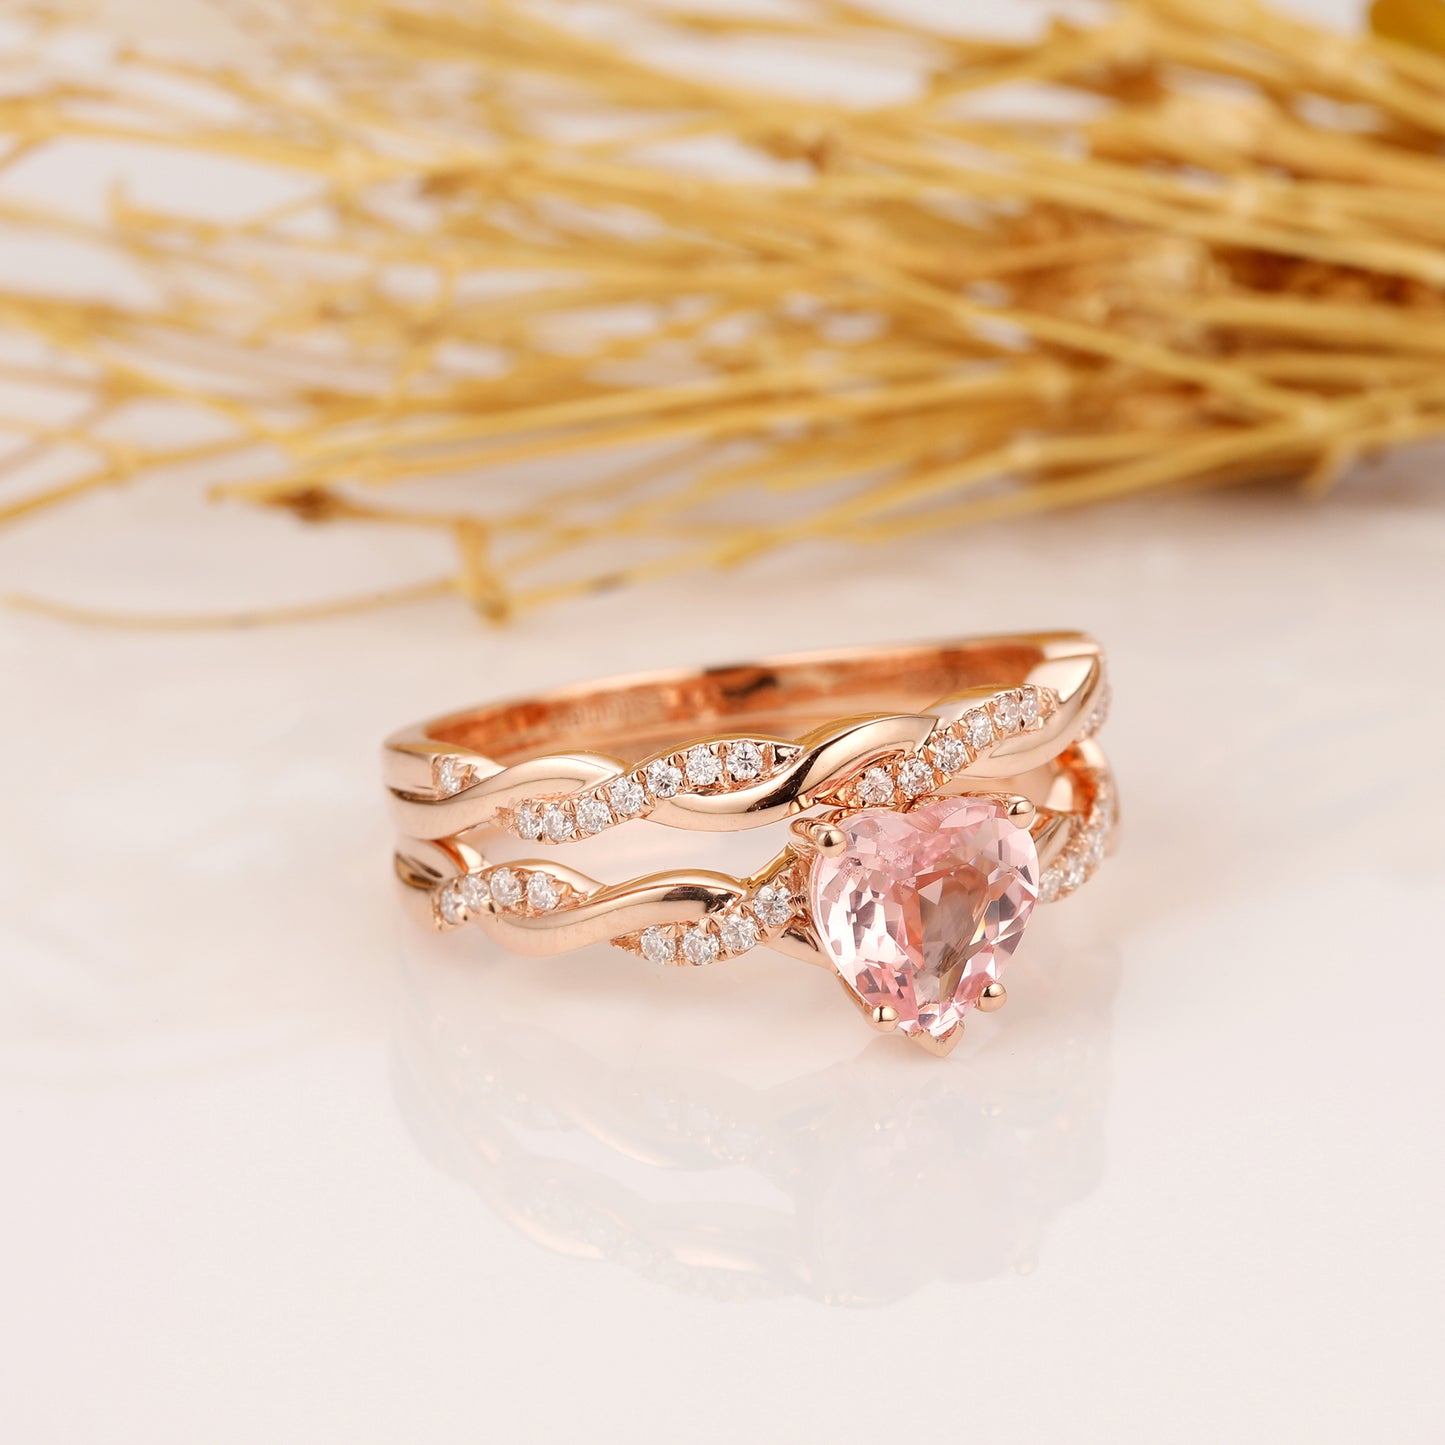 Heart Shape 1ct Center Morganite Bridal Set, Rope Style Accents 14k Rose Gold Engagement Ring